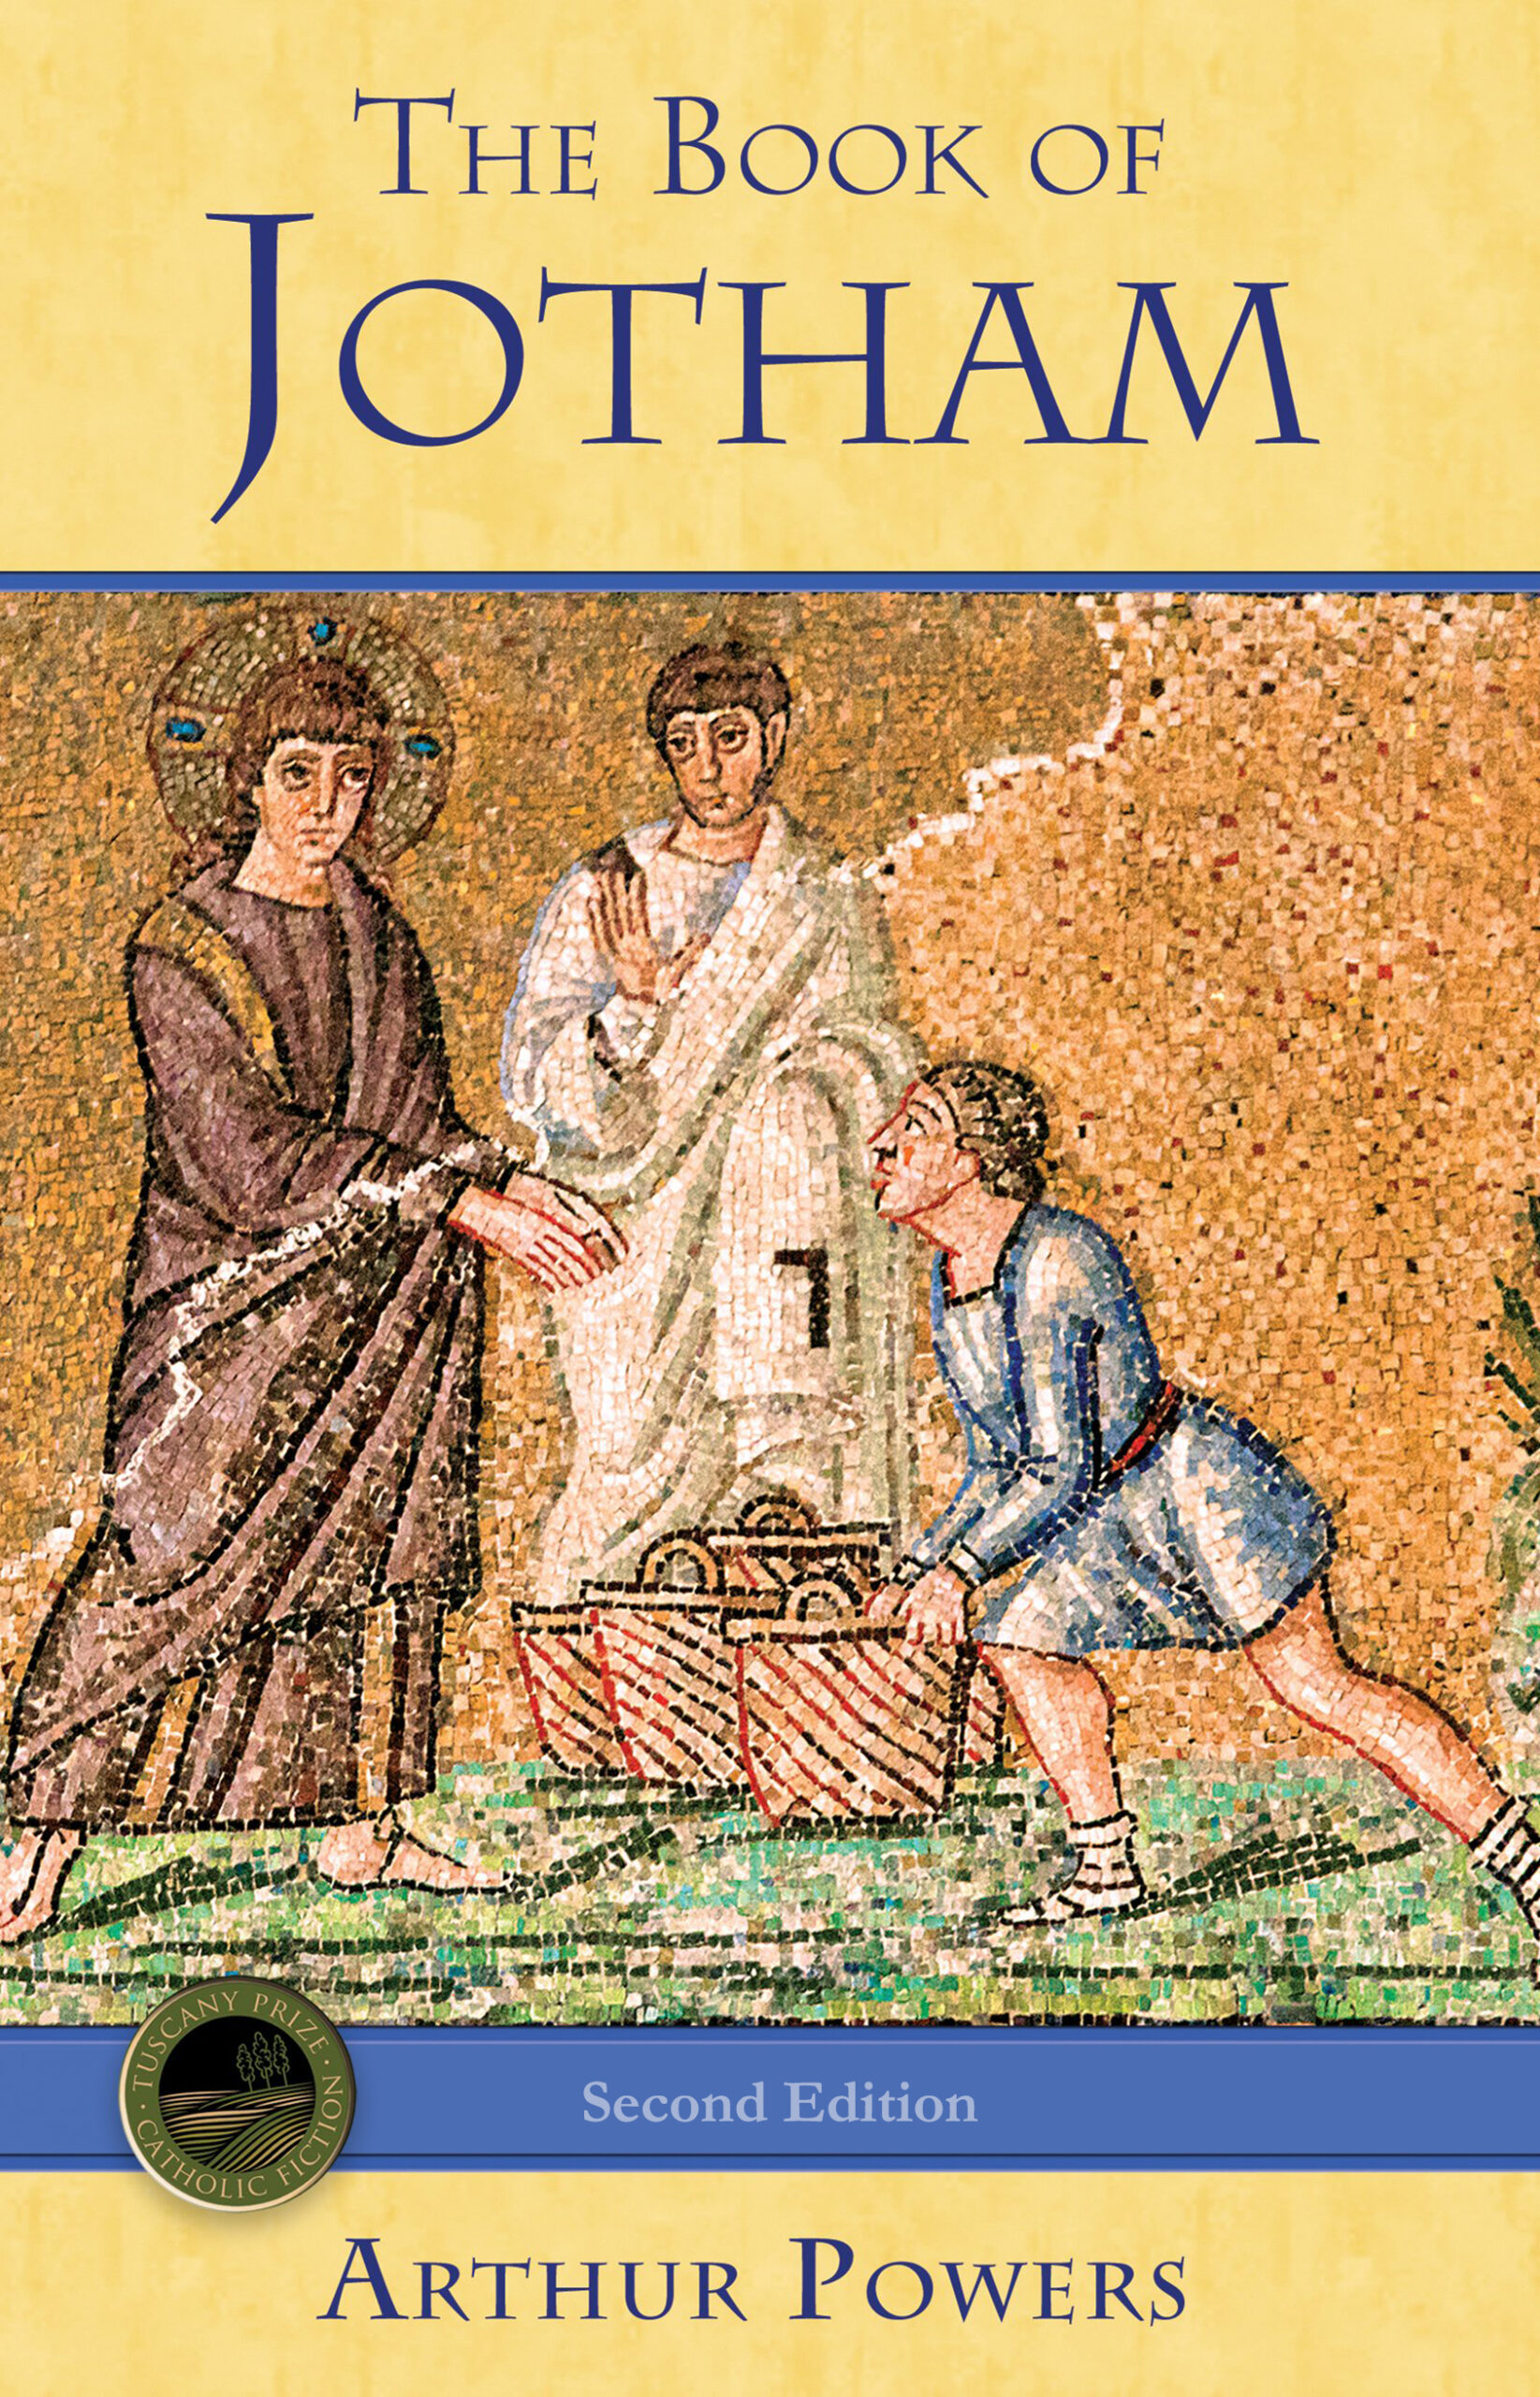 FREE: The Book of Jotham by Arthur Powers